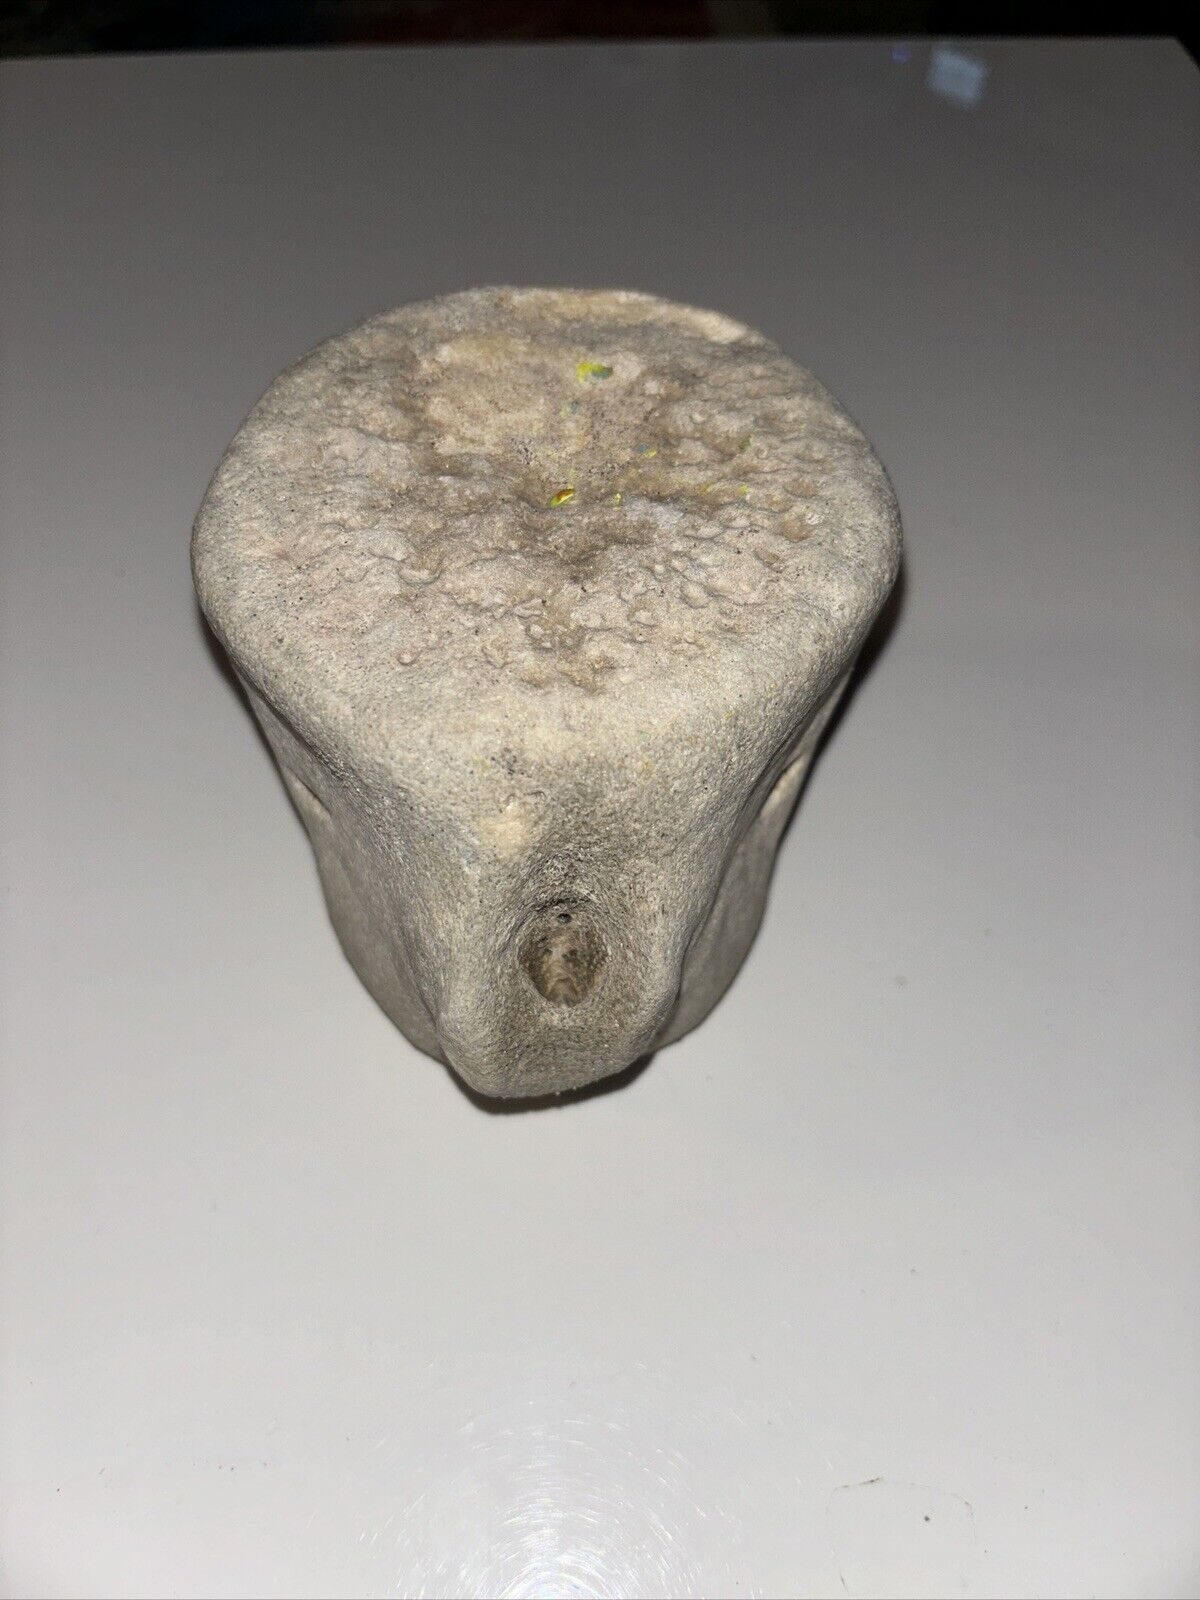 AUTHENTIC SPERM WHALE VERTEBRAE FOSSIL 9.5 INCHES BY 2.5 INCHES. FIRE ISLAND NY